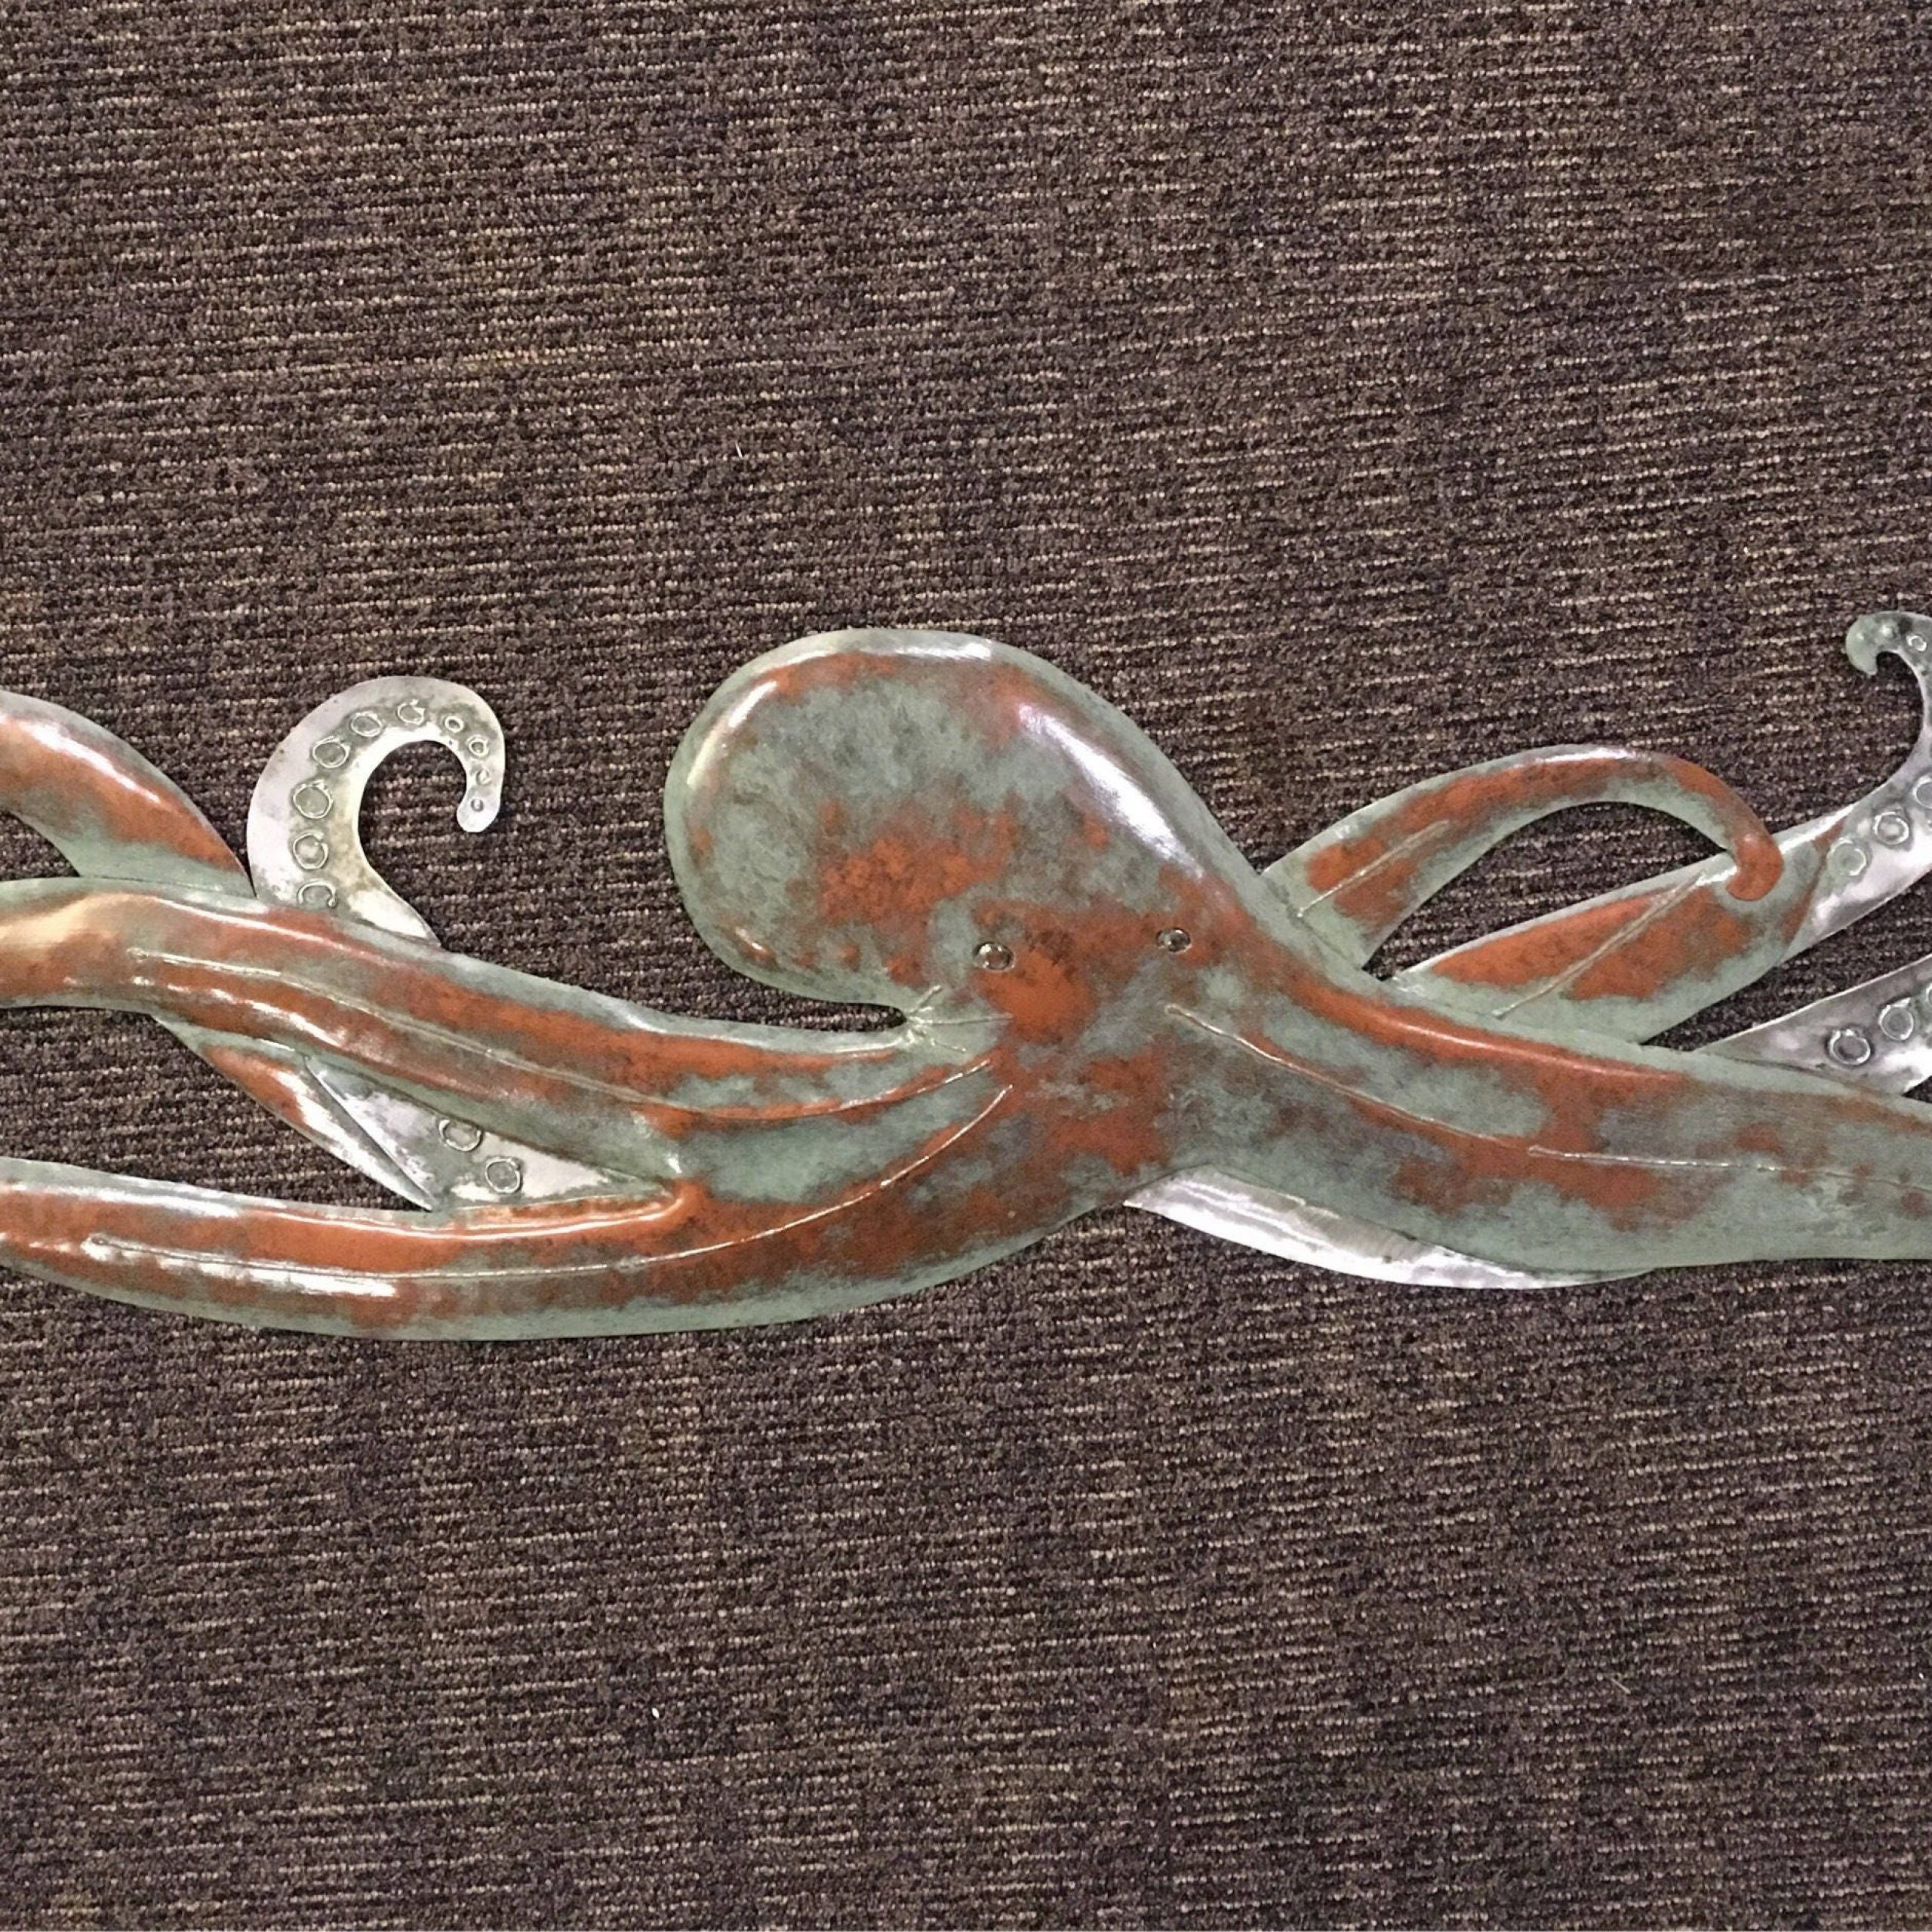 Octopus Metal 48In Handmade Wall Art Sculpture Free Shipping In The Us Inside Octopus Metal Wall Sculptures (View 13 of 15)